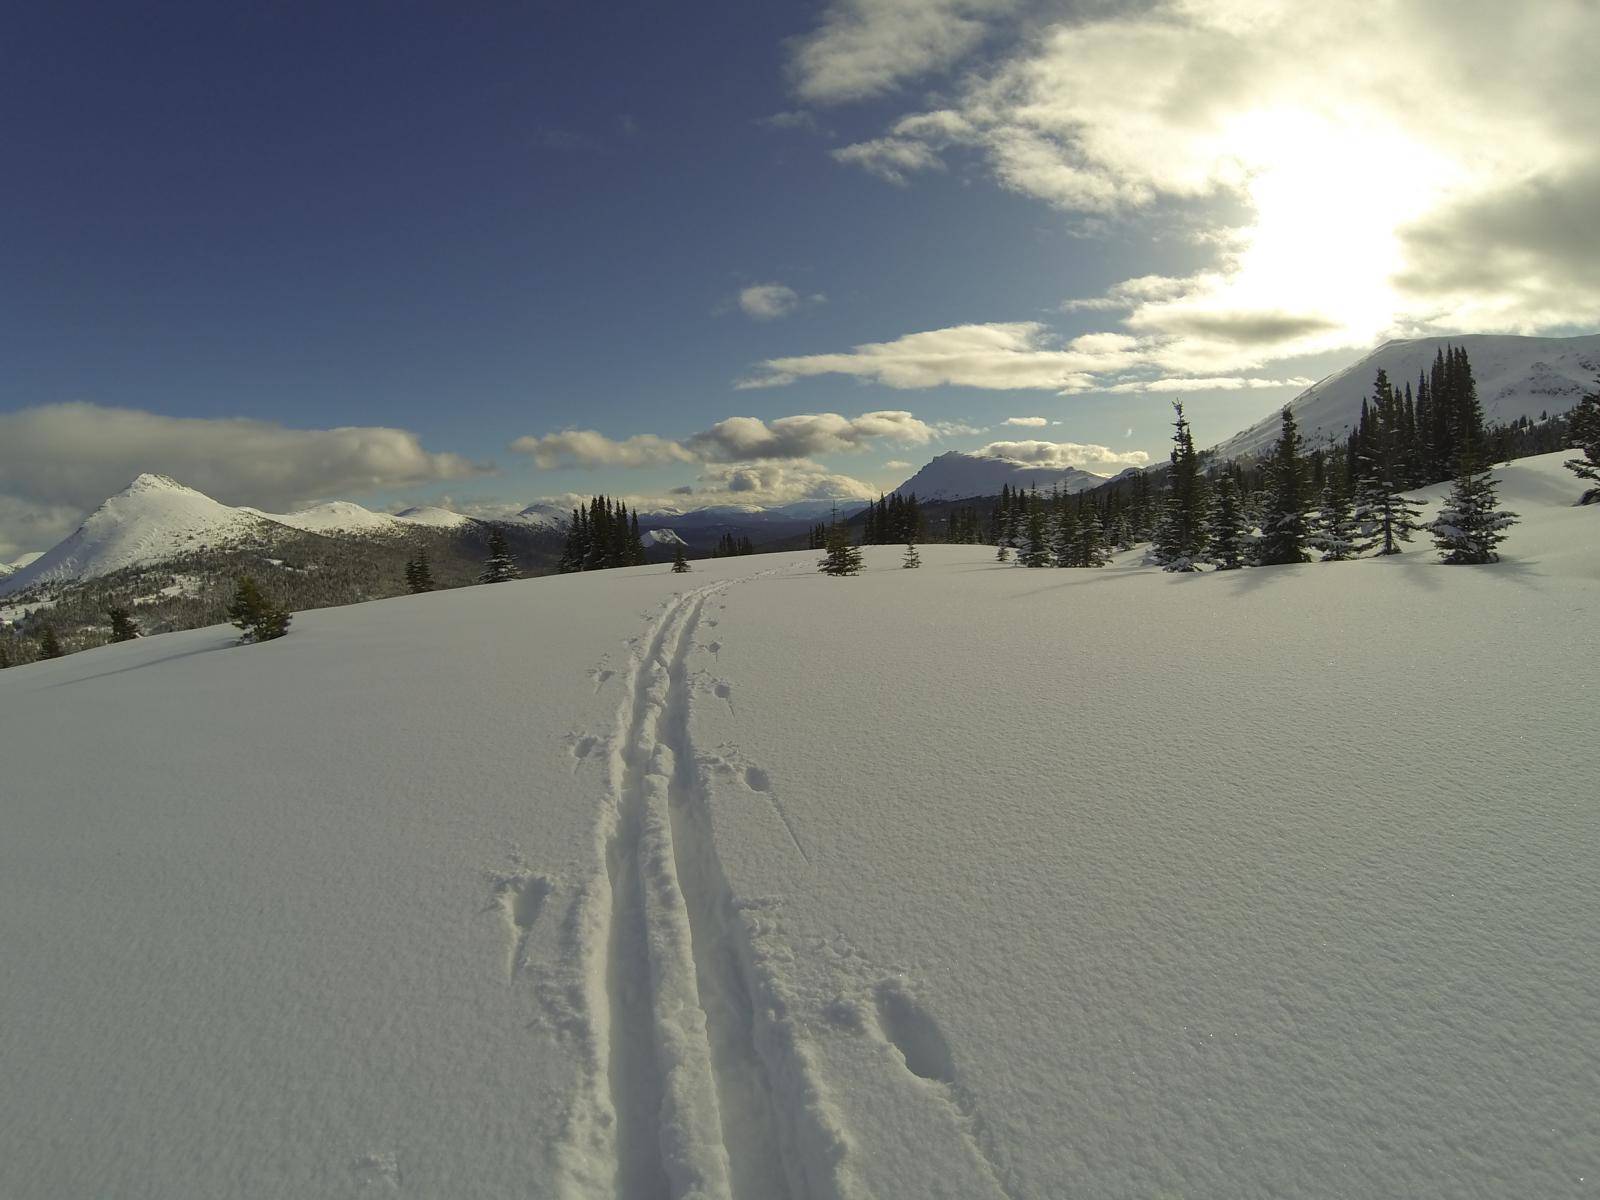 A cross-country skiing track in deep snow towards the sunset and the pine tree forest